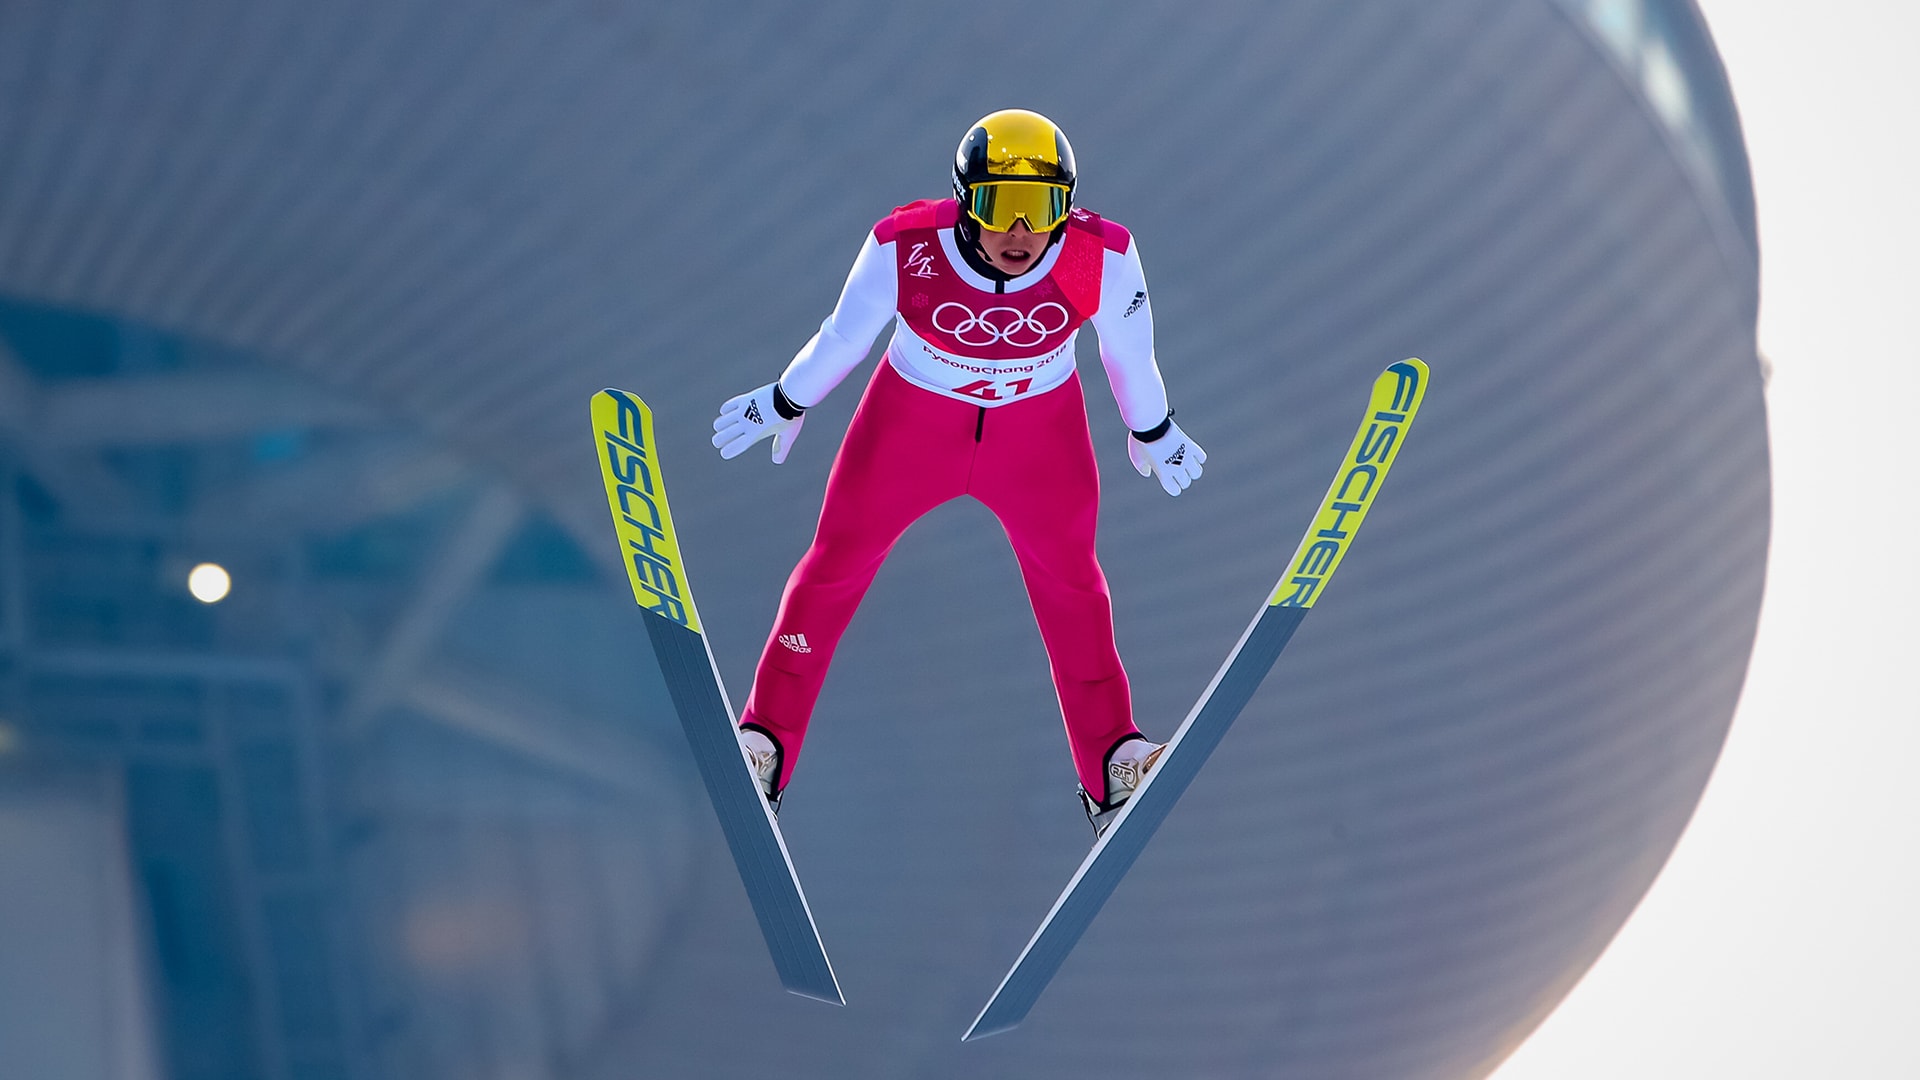 How to watch Ski Jumping at the 2022 Winter Olympics on NBC and Peacock